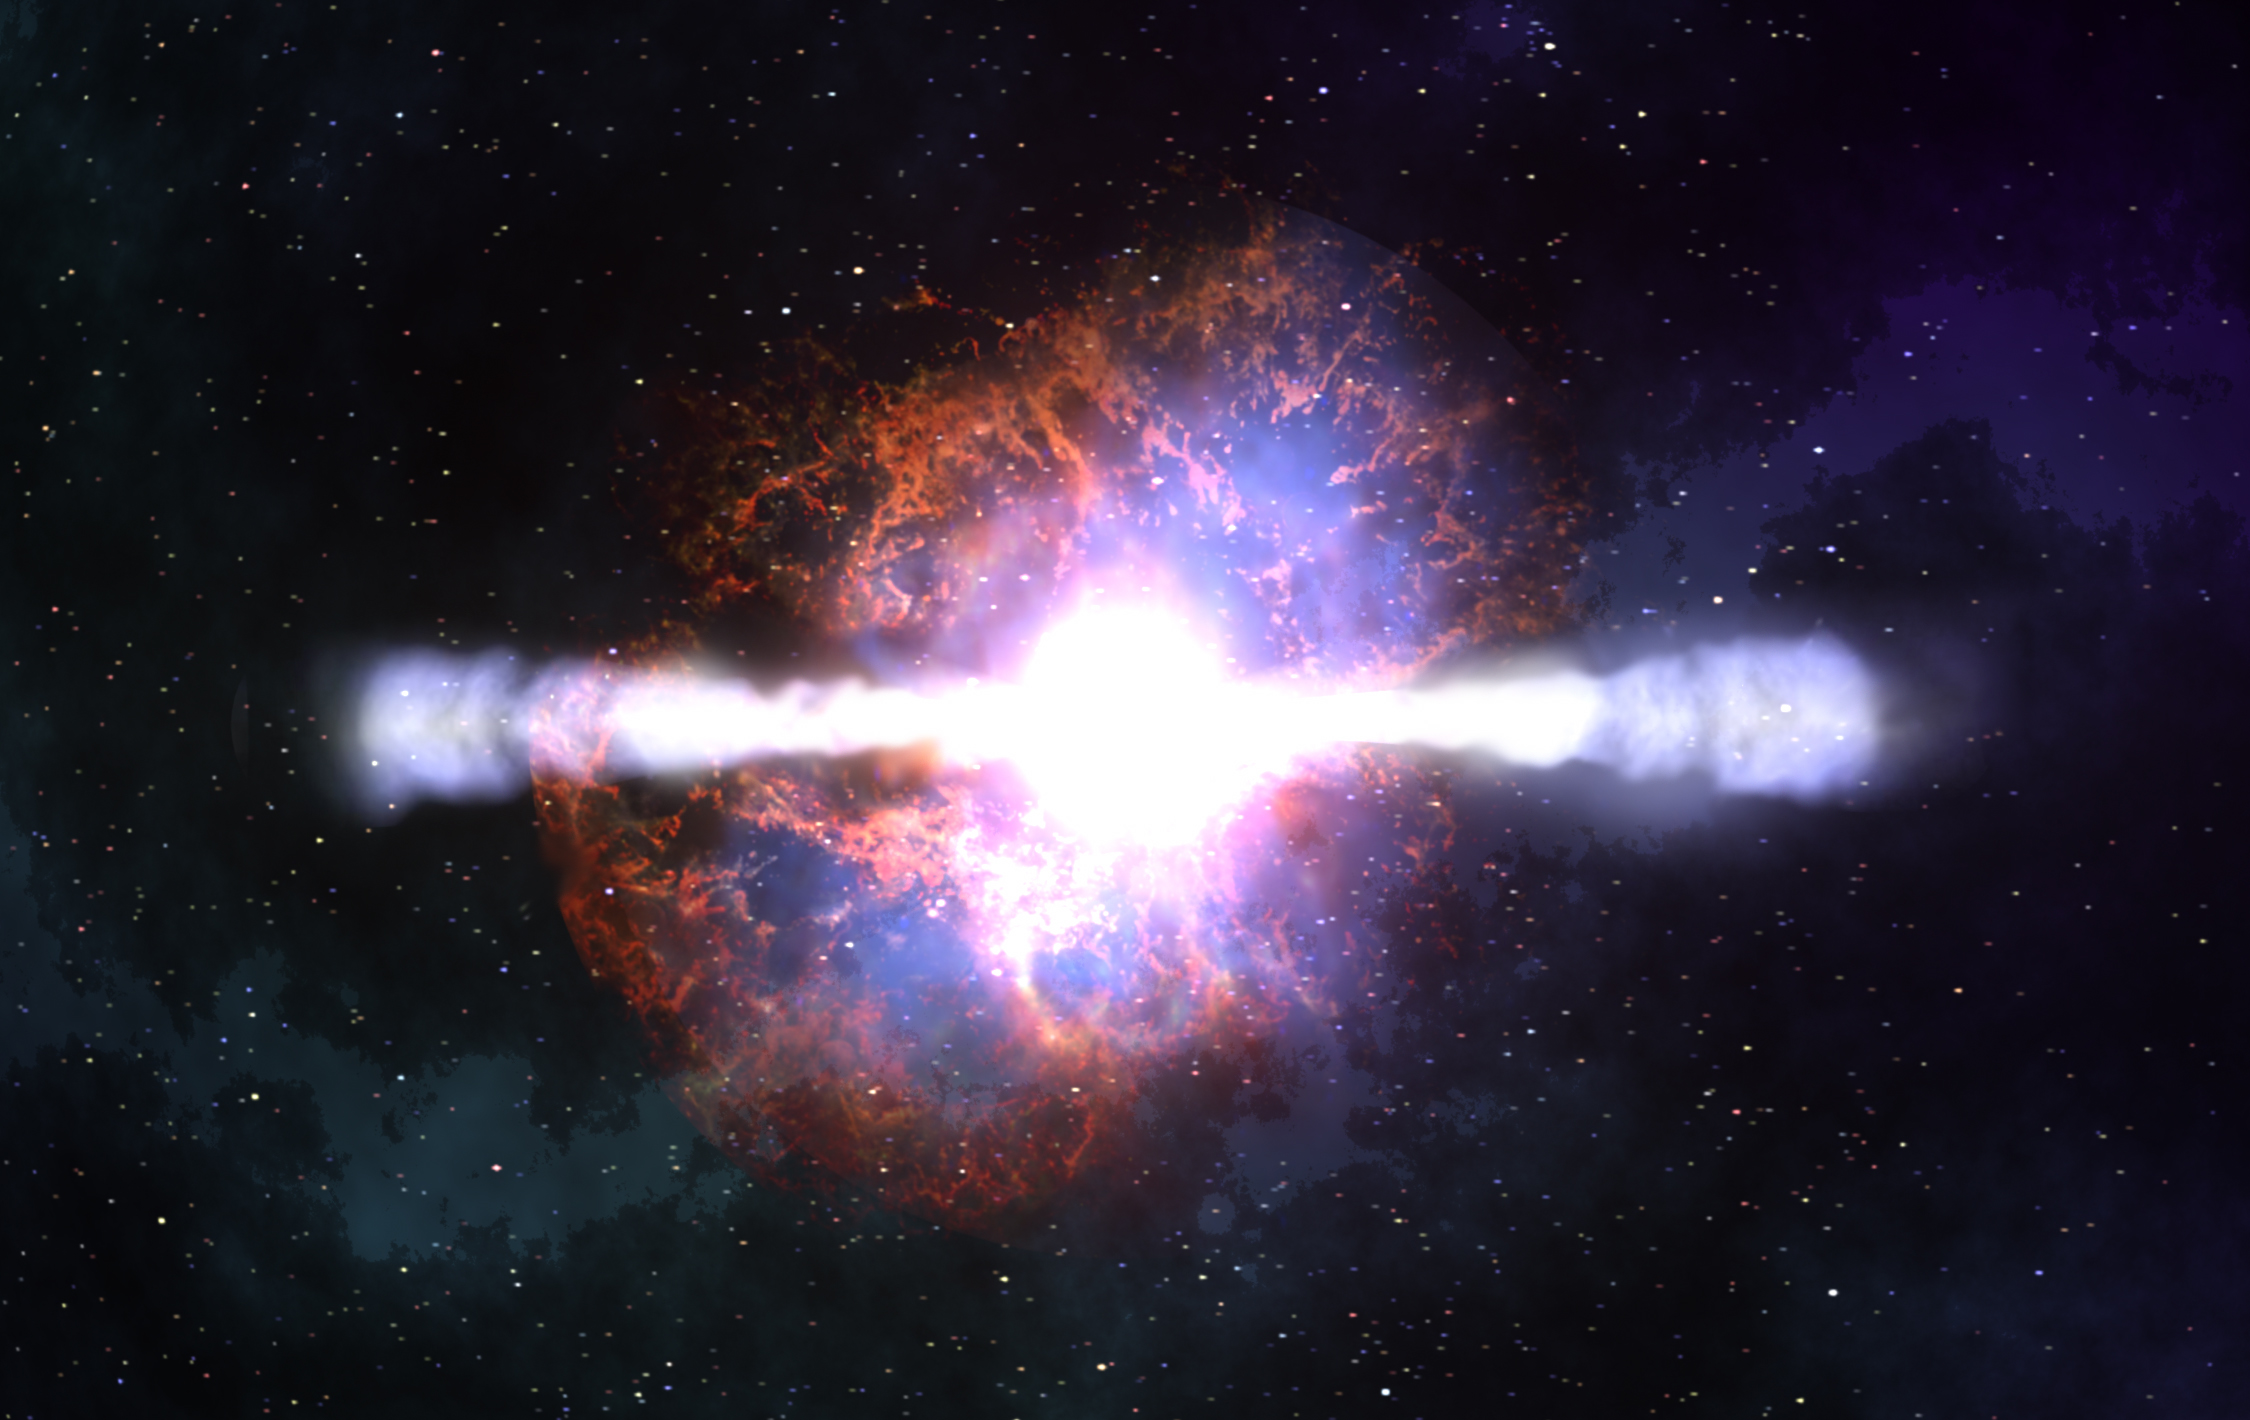 Artistic rendition of a Gamma Ray Burst.